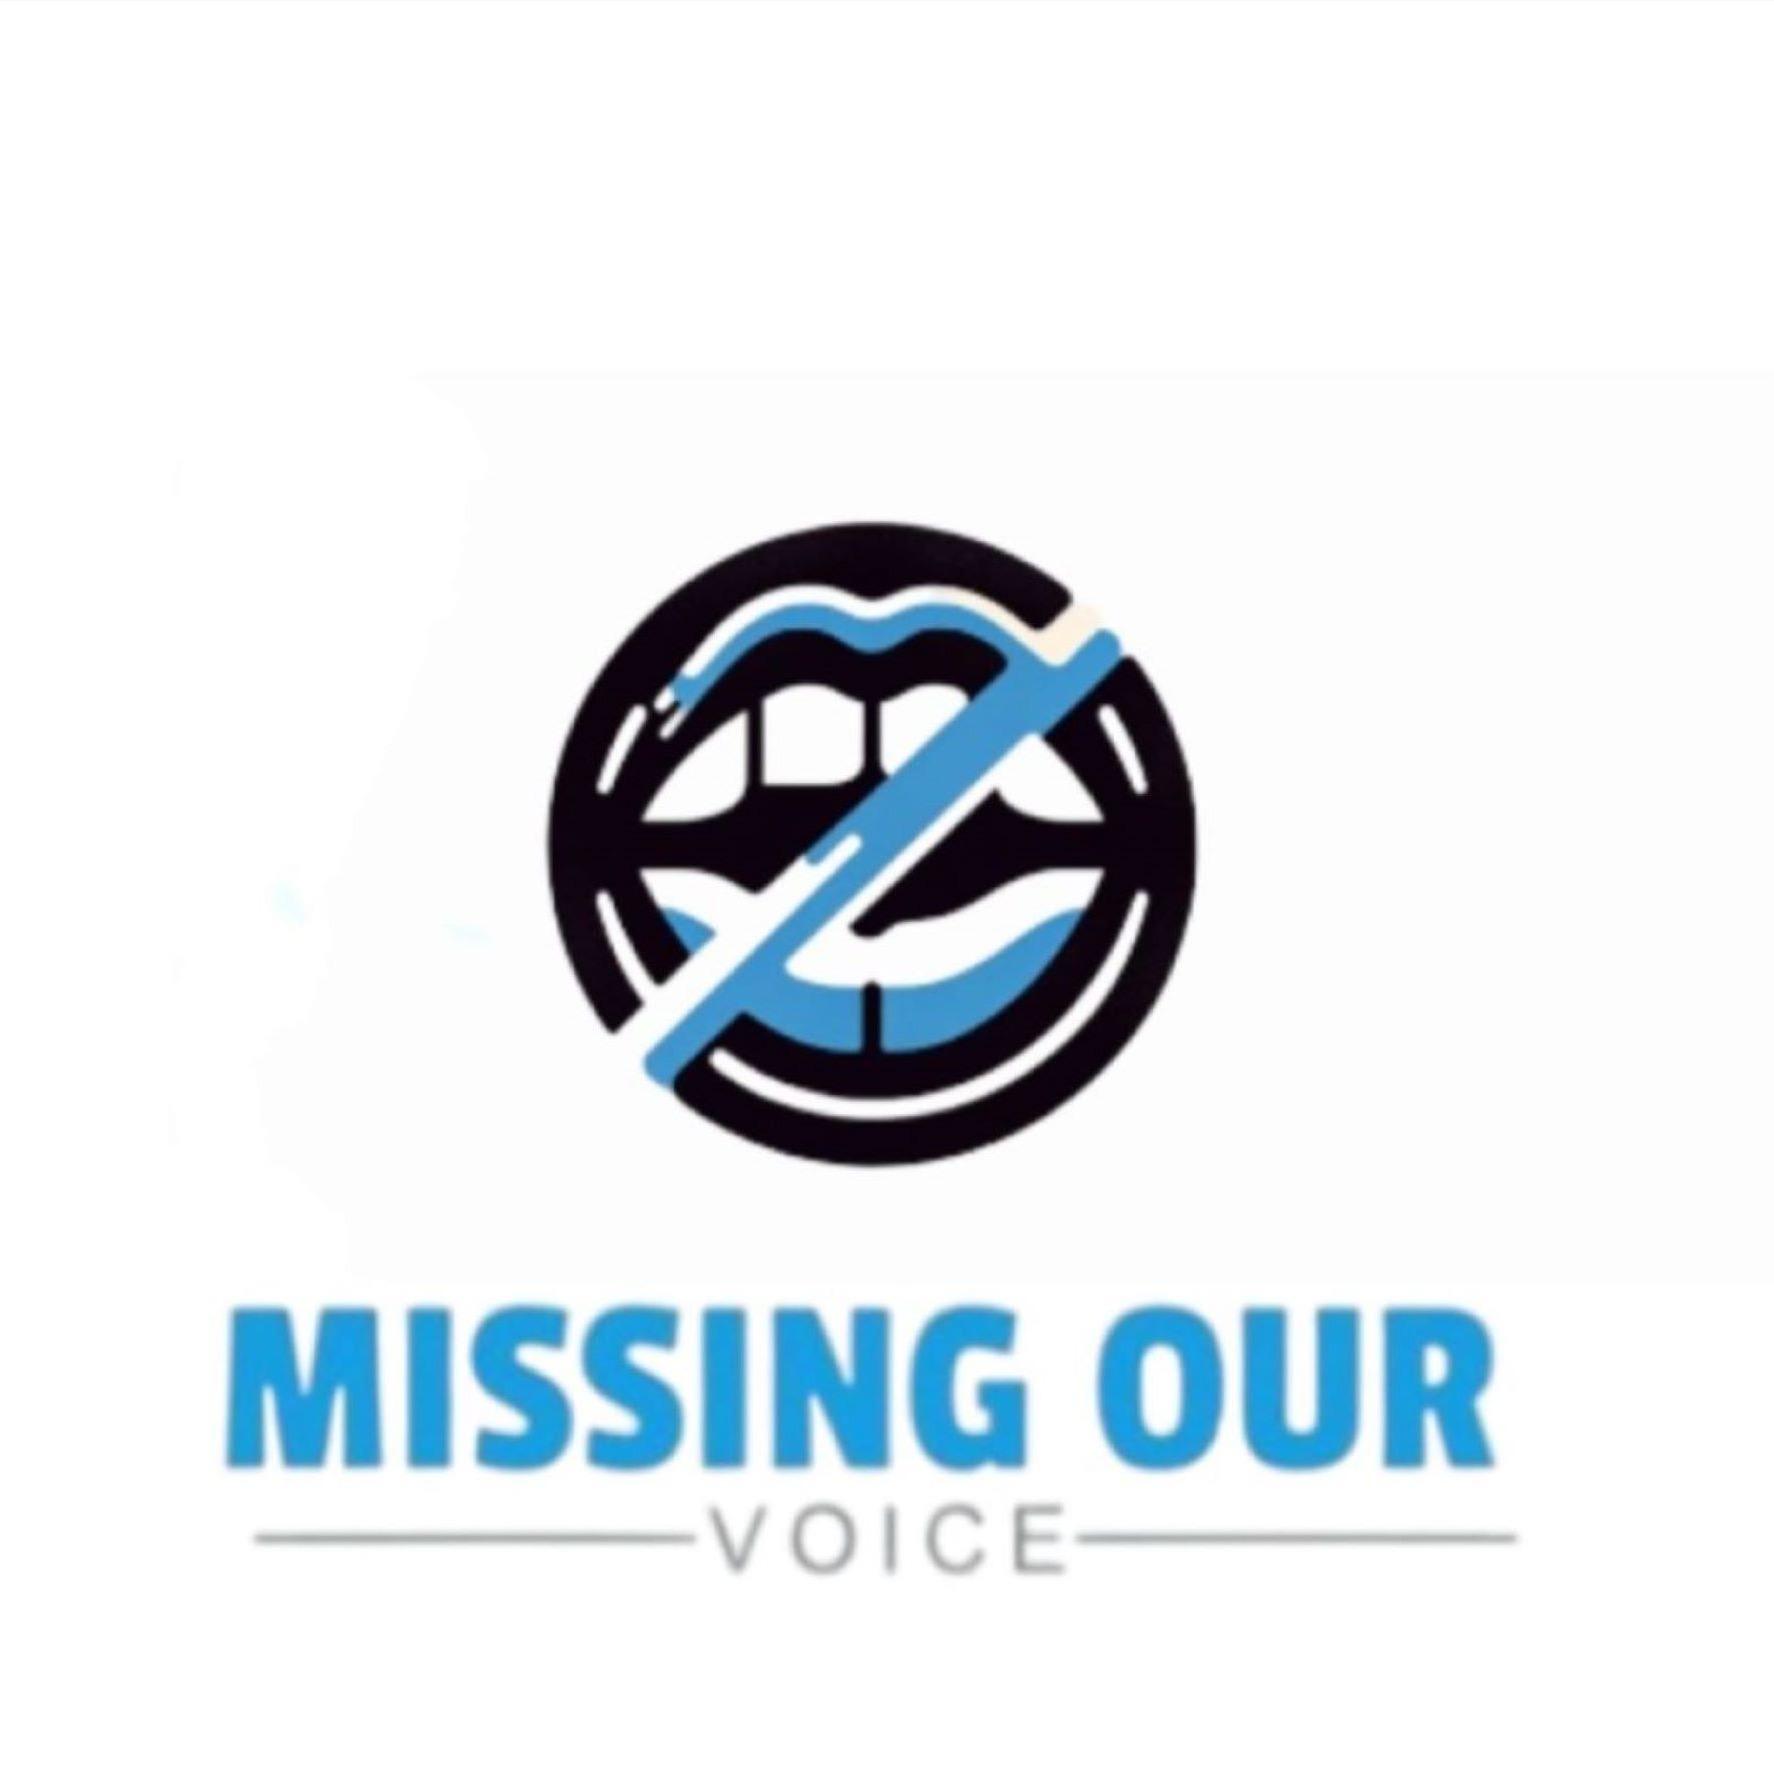 MISSING OUR VOICE  (The Voice of Families and Community of Violence)